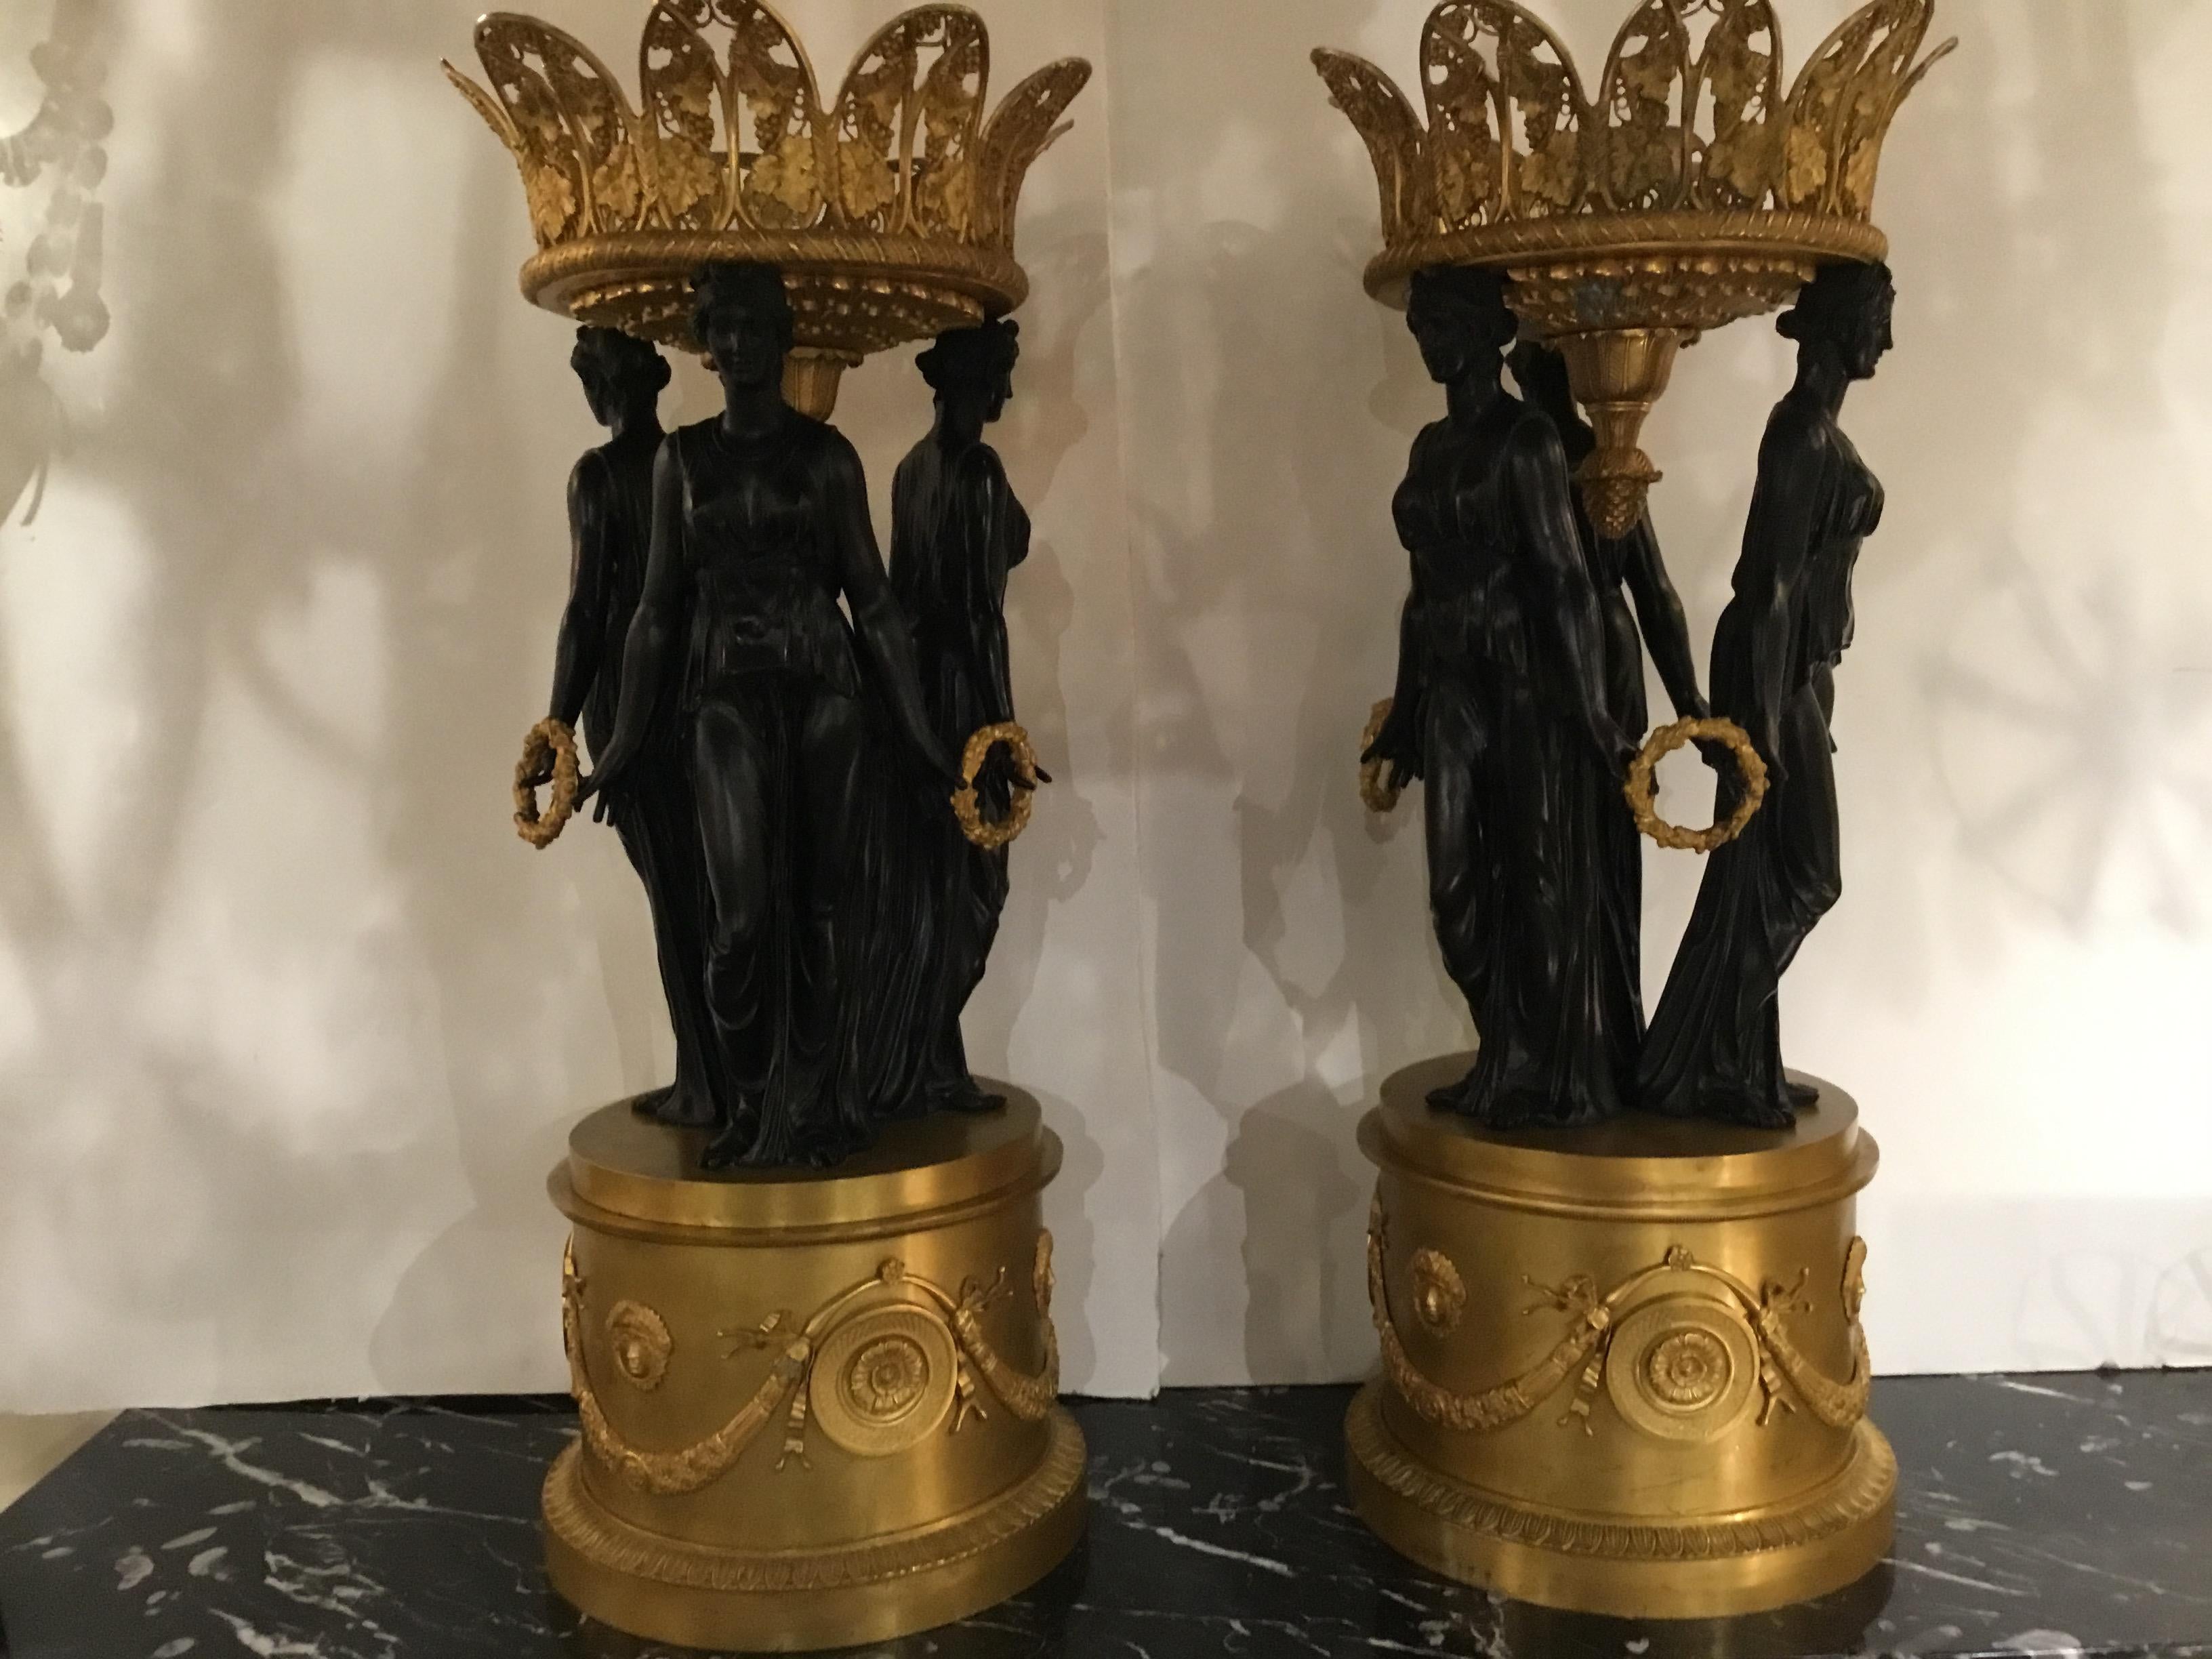 Pair of exquisite monumental centerpieces with bronze work in the the 
Manner of Pierre-Philippe Thormire, 1751-1843.  The pair in the form of reticulated gilt grape vine baskets sit at the crest of three classically draped maidens. They hold the